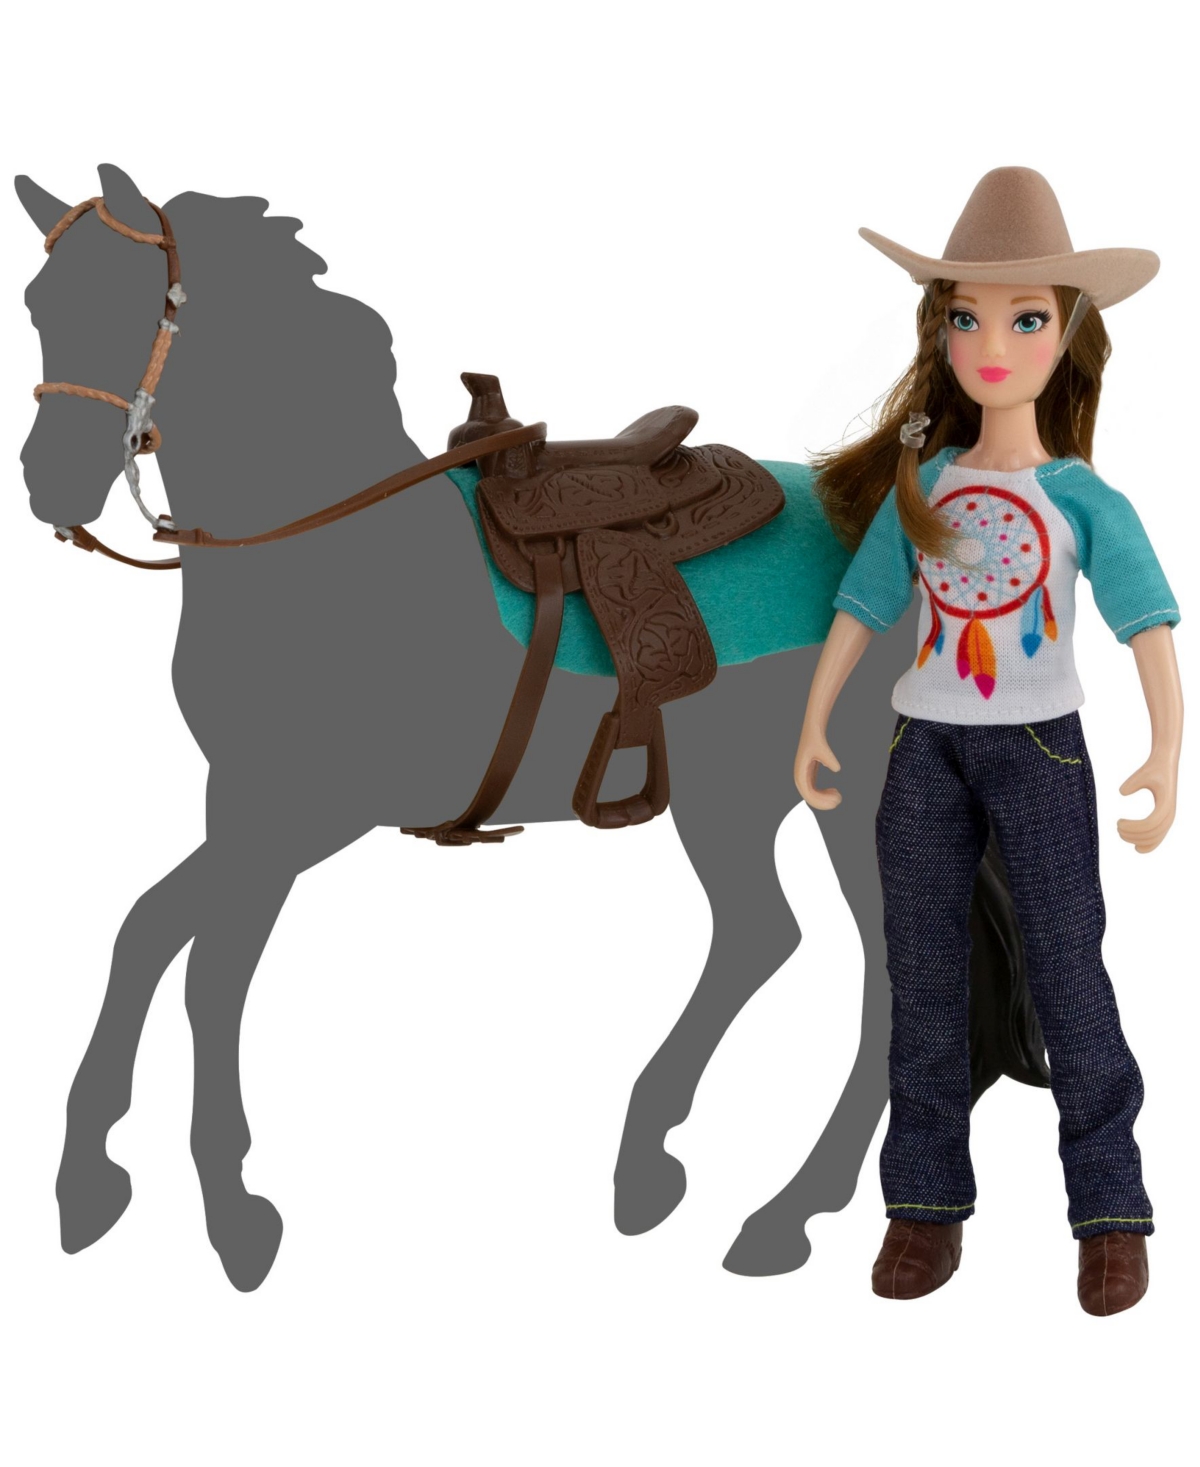 Breyer Classics Freedom Series Natalie Cowgirl Doll And Accessory 5 Piece Set In Multi